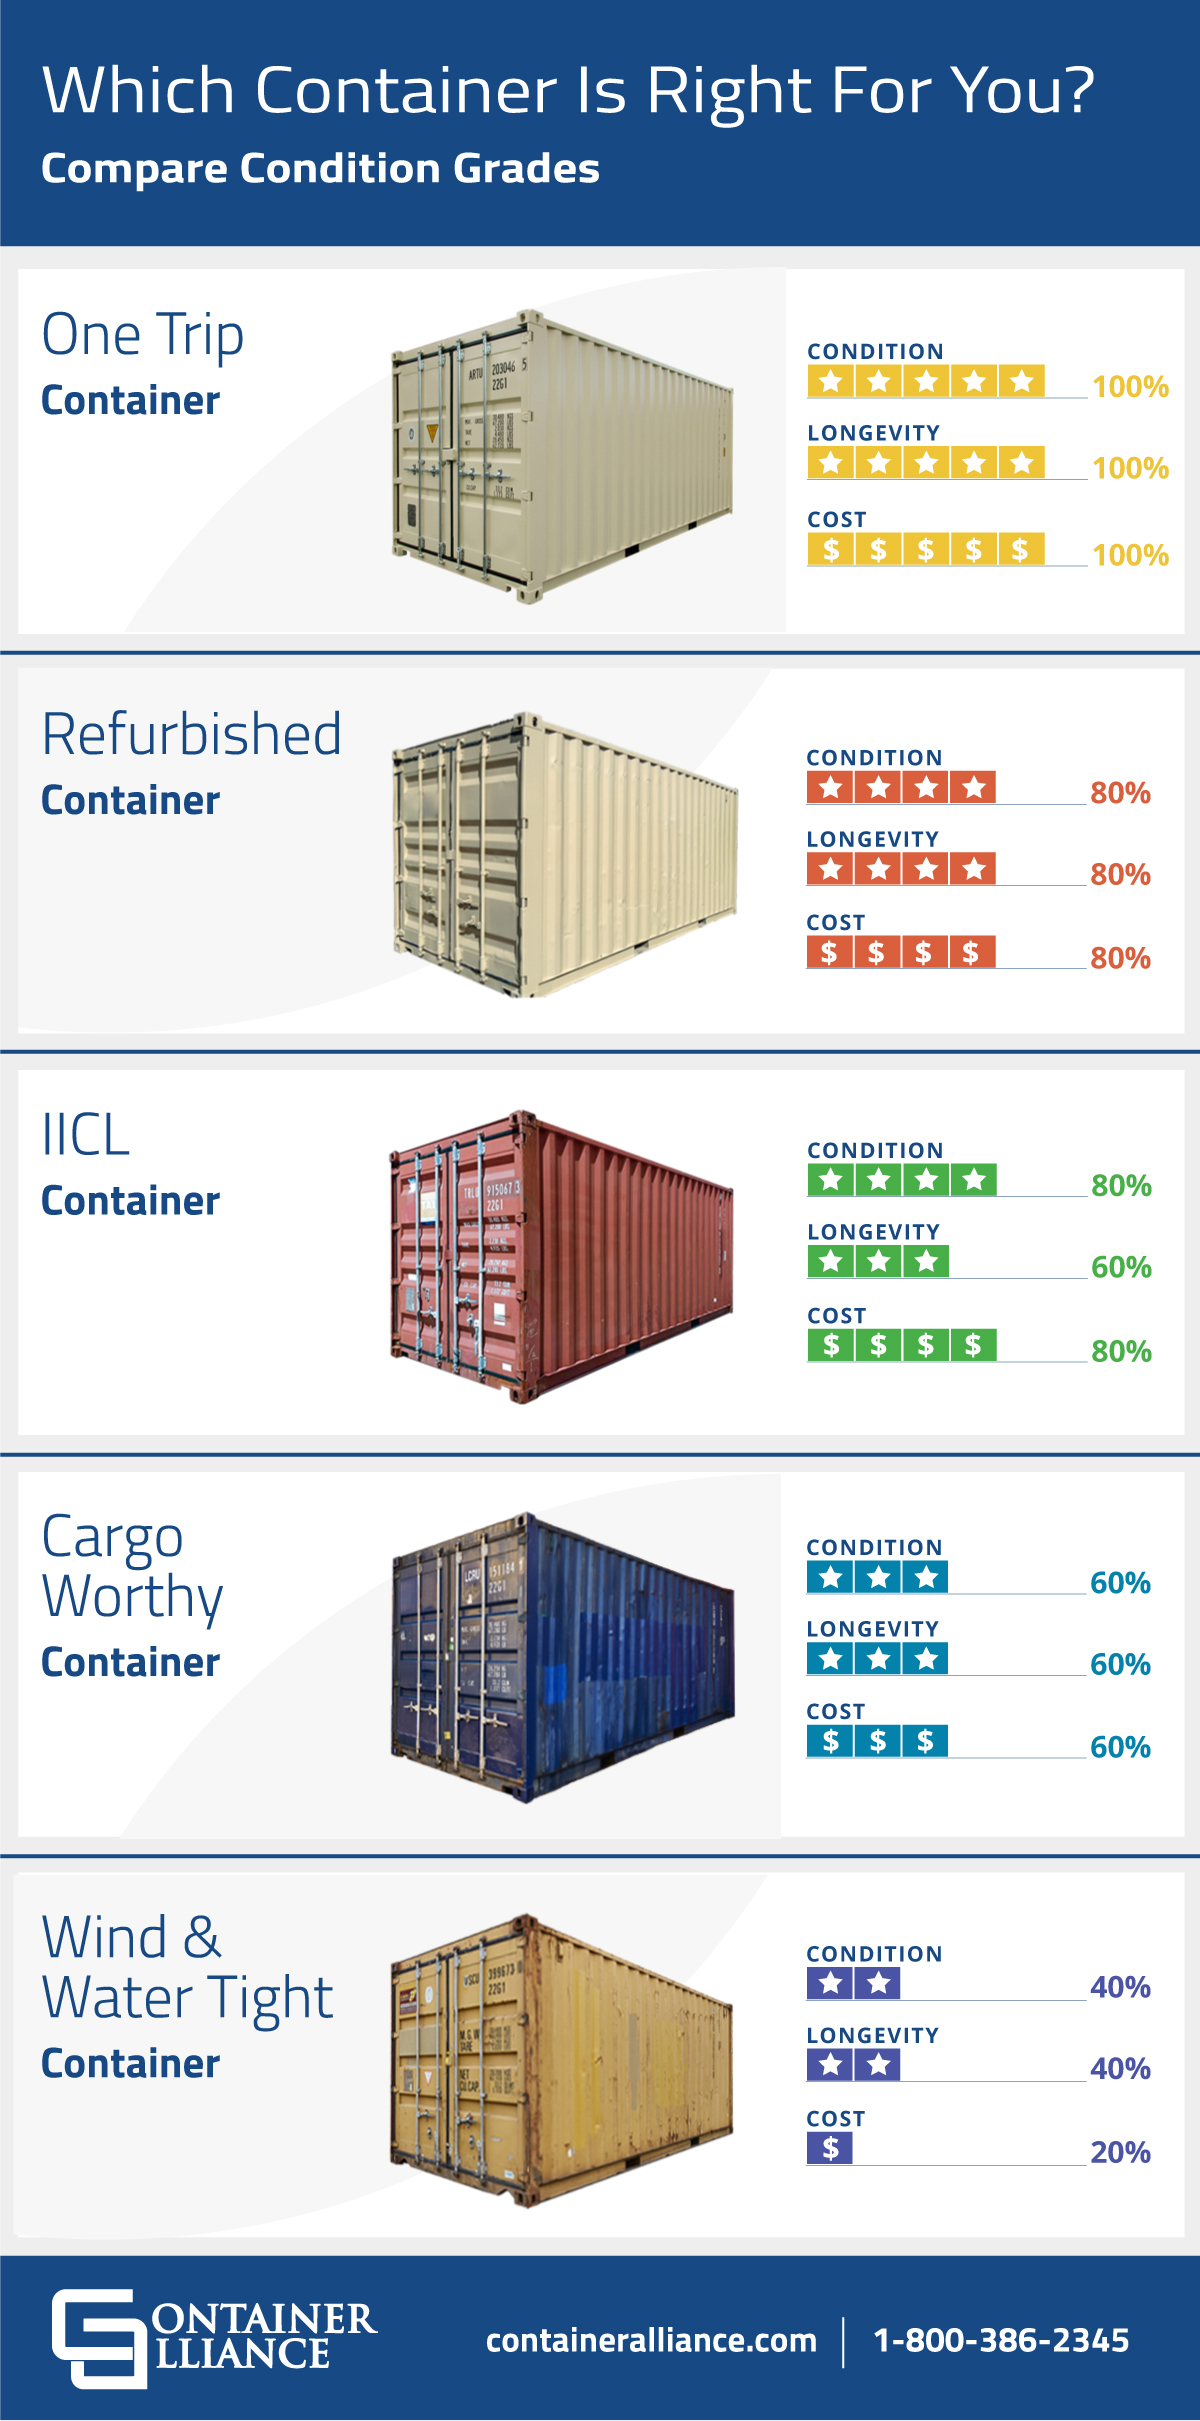 Cargo Worthy Certification: How Long Does It Last?